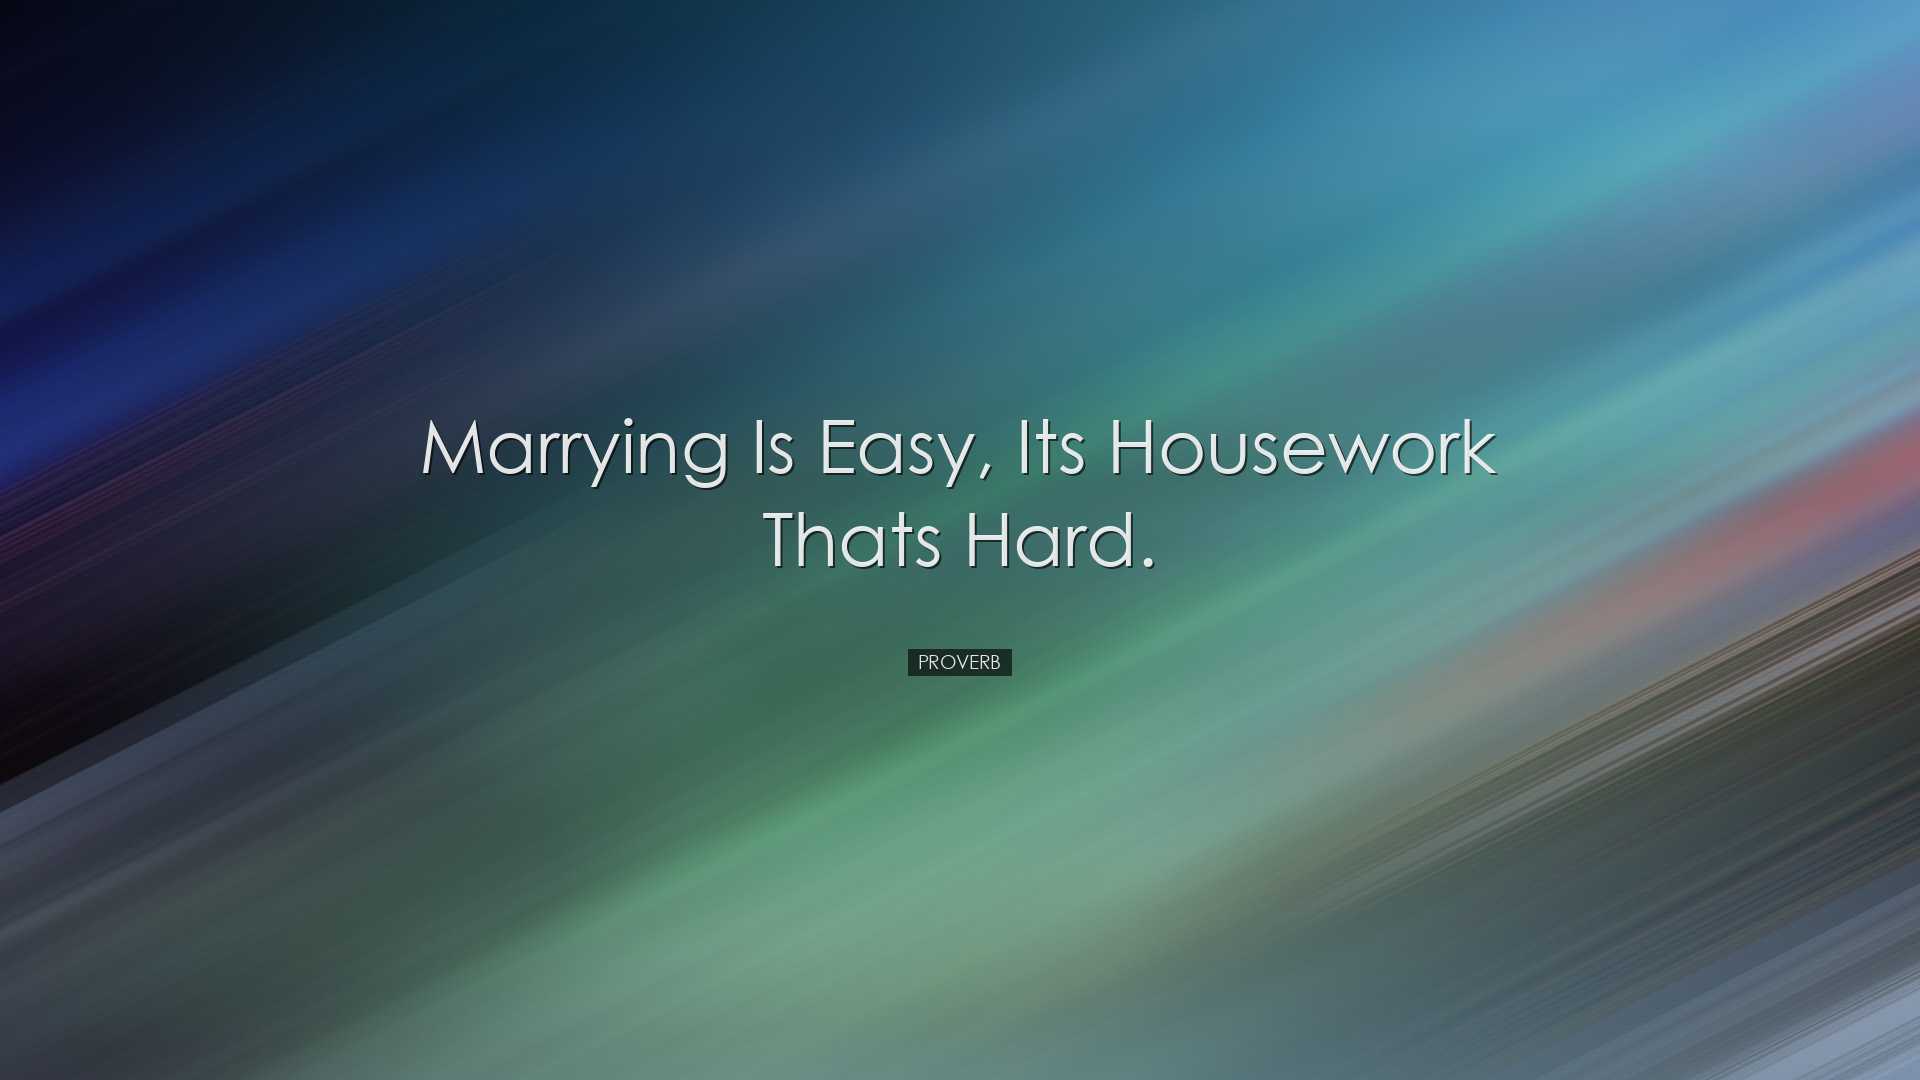 Marrying is easy, its housework thats hard. - Proverb